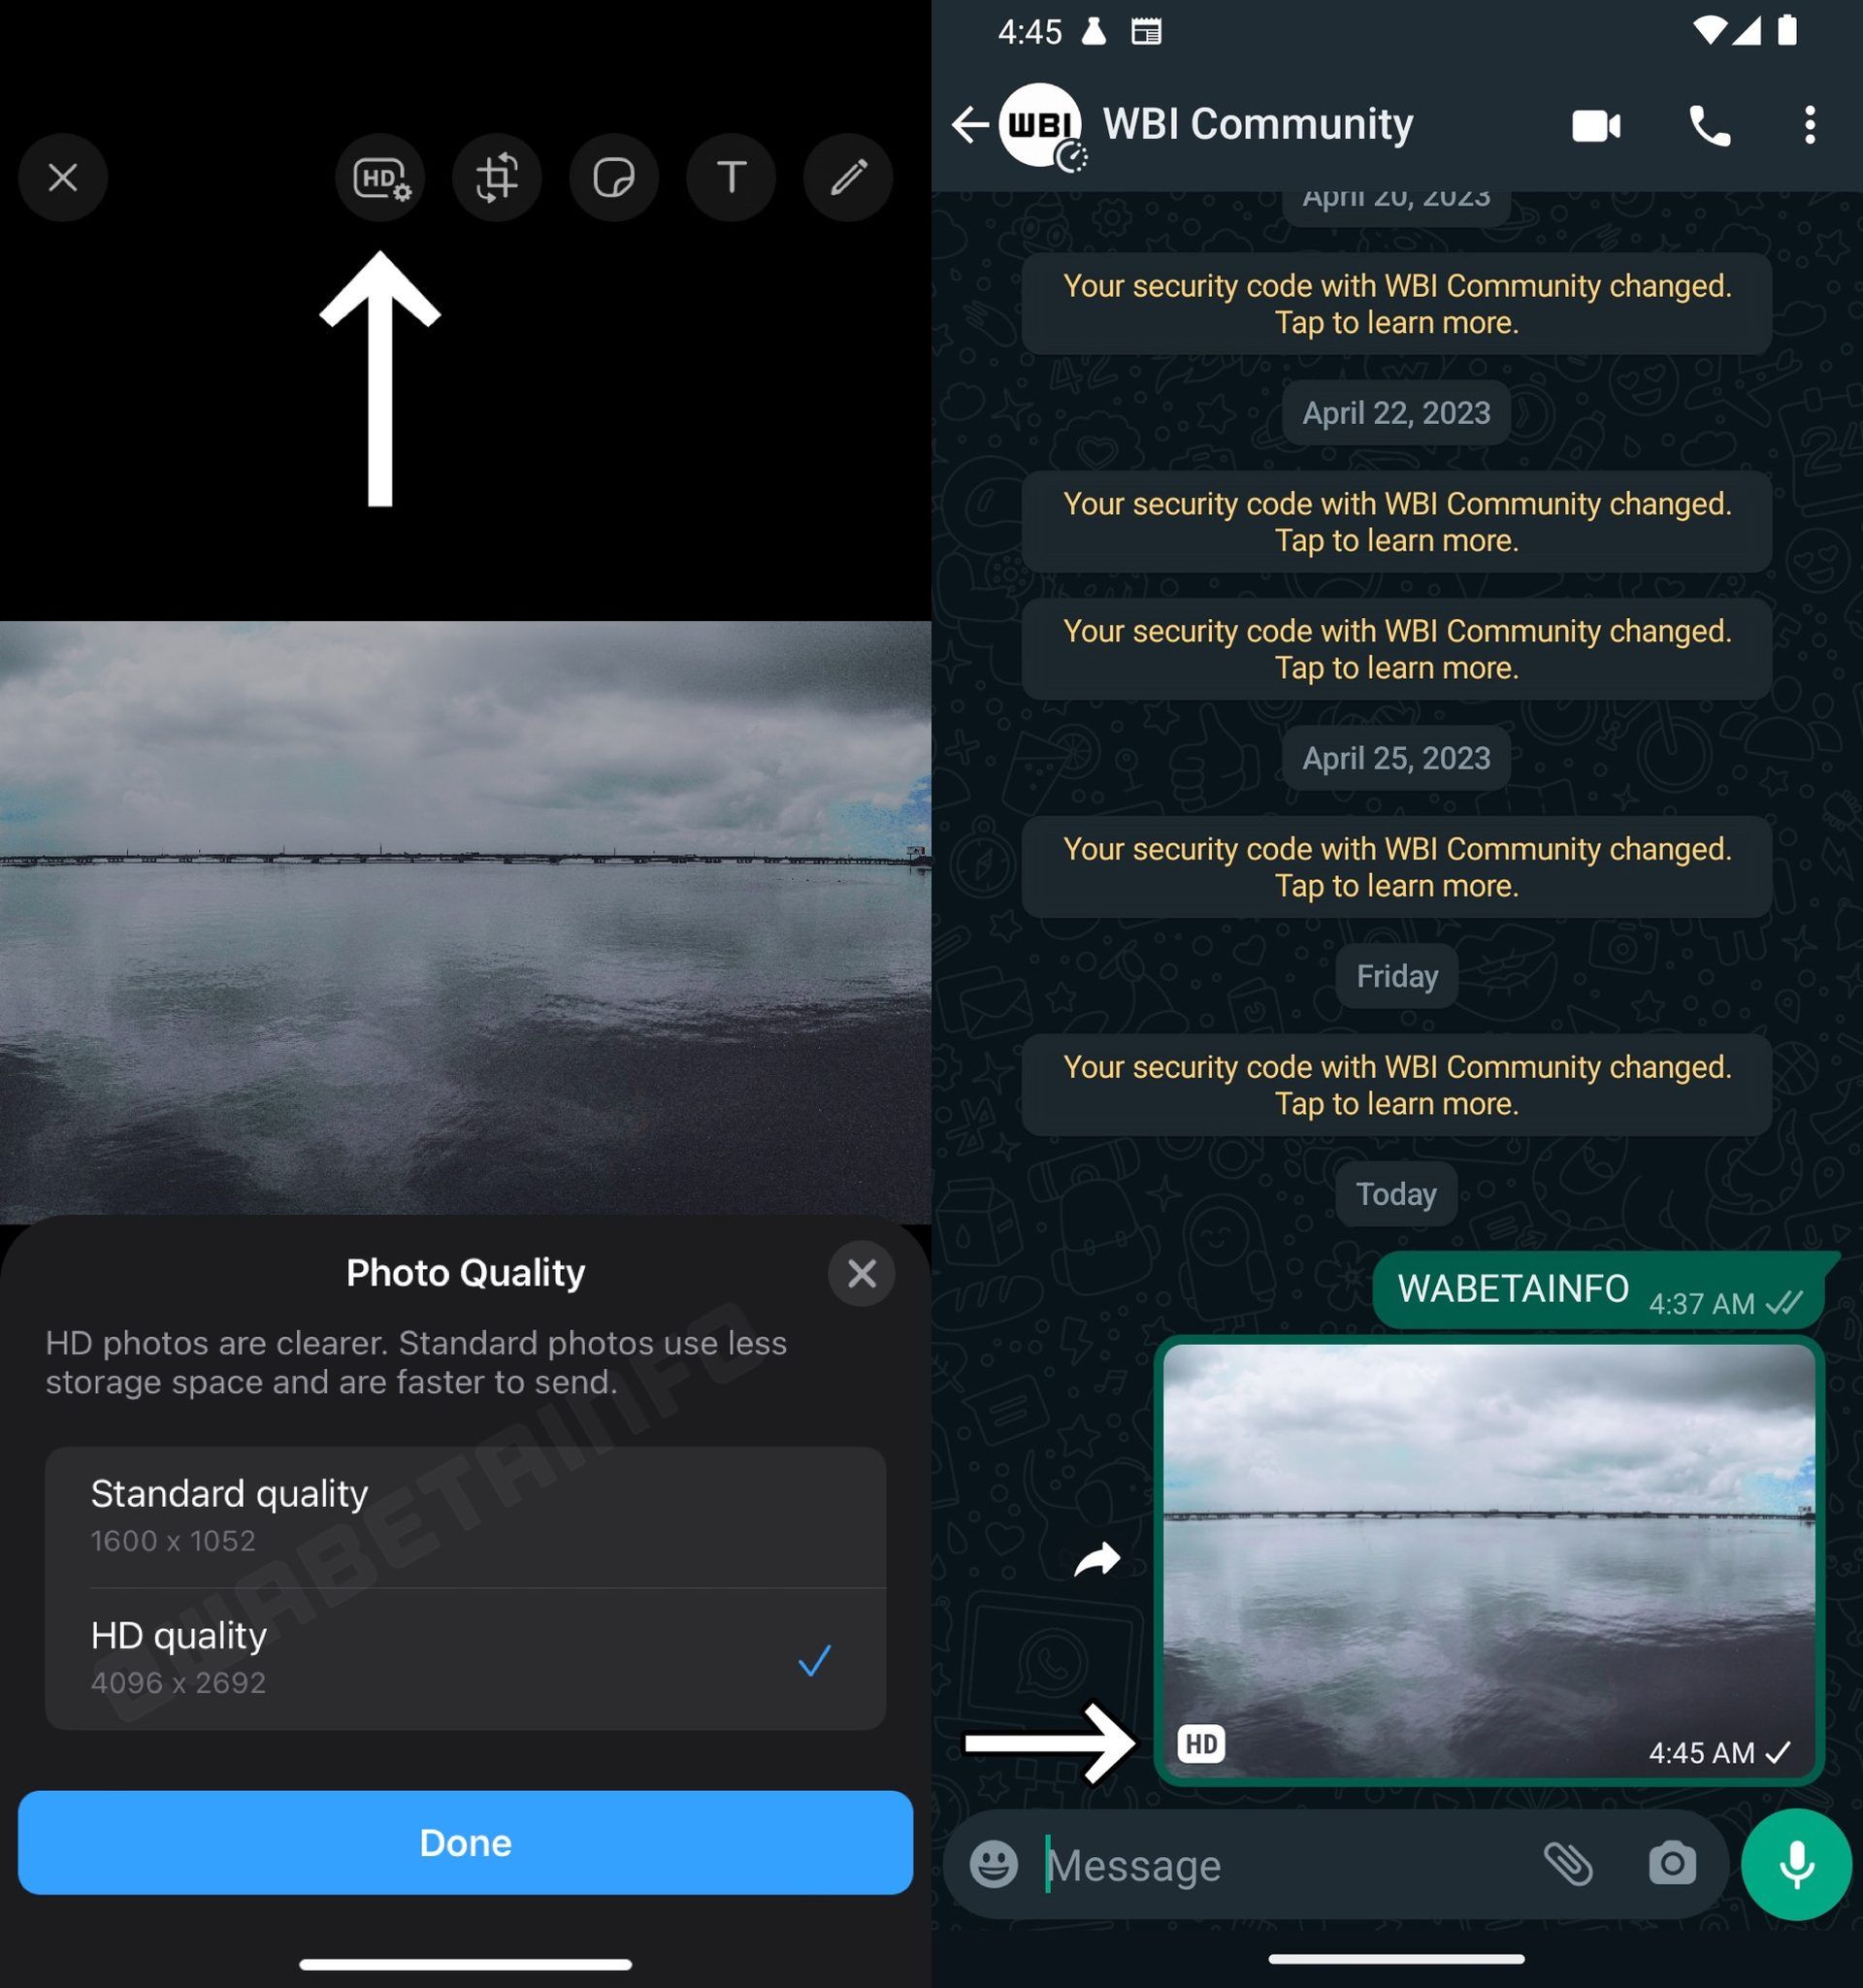 WhatsApp HD photos: Finally, you can send an image via WhatsApp and post it on Instagram